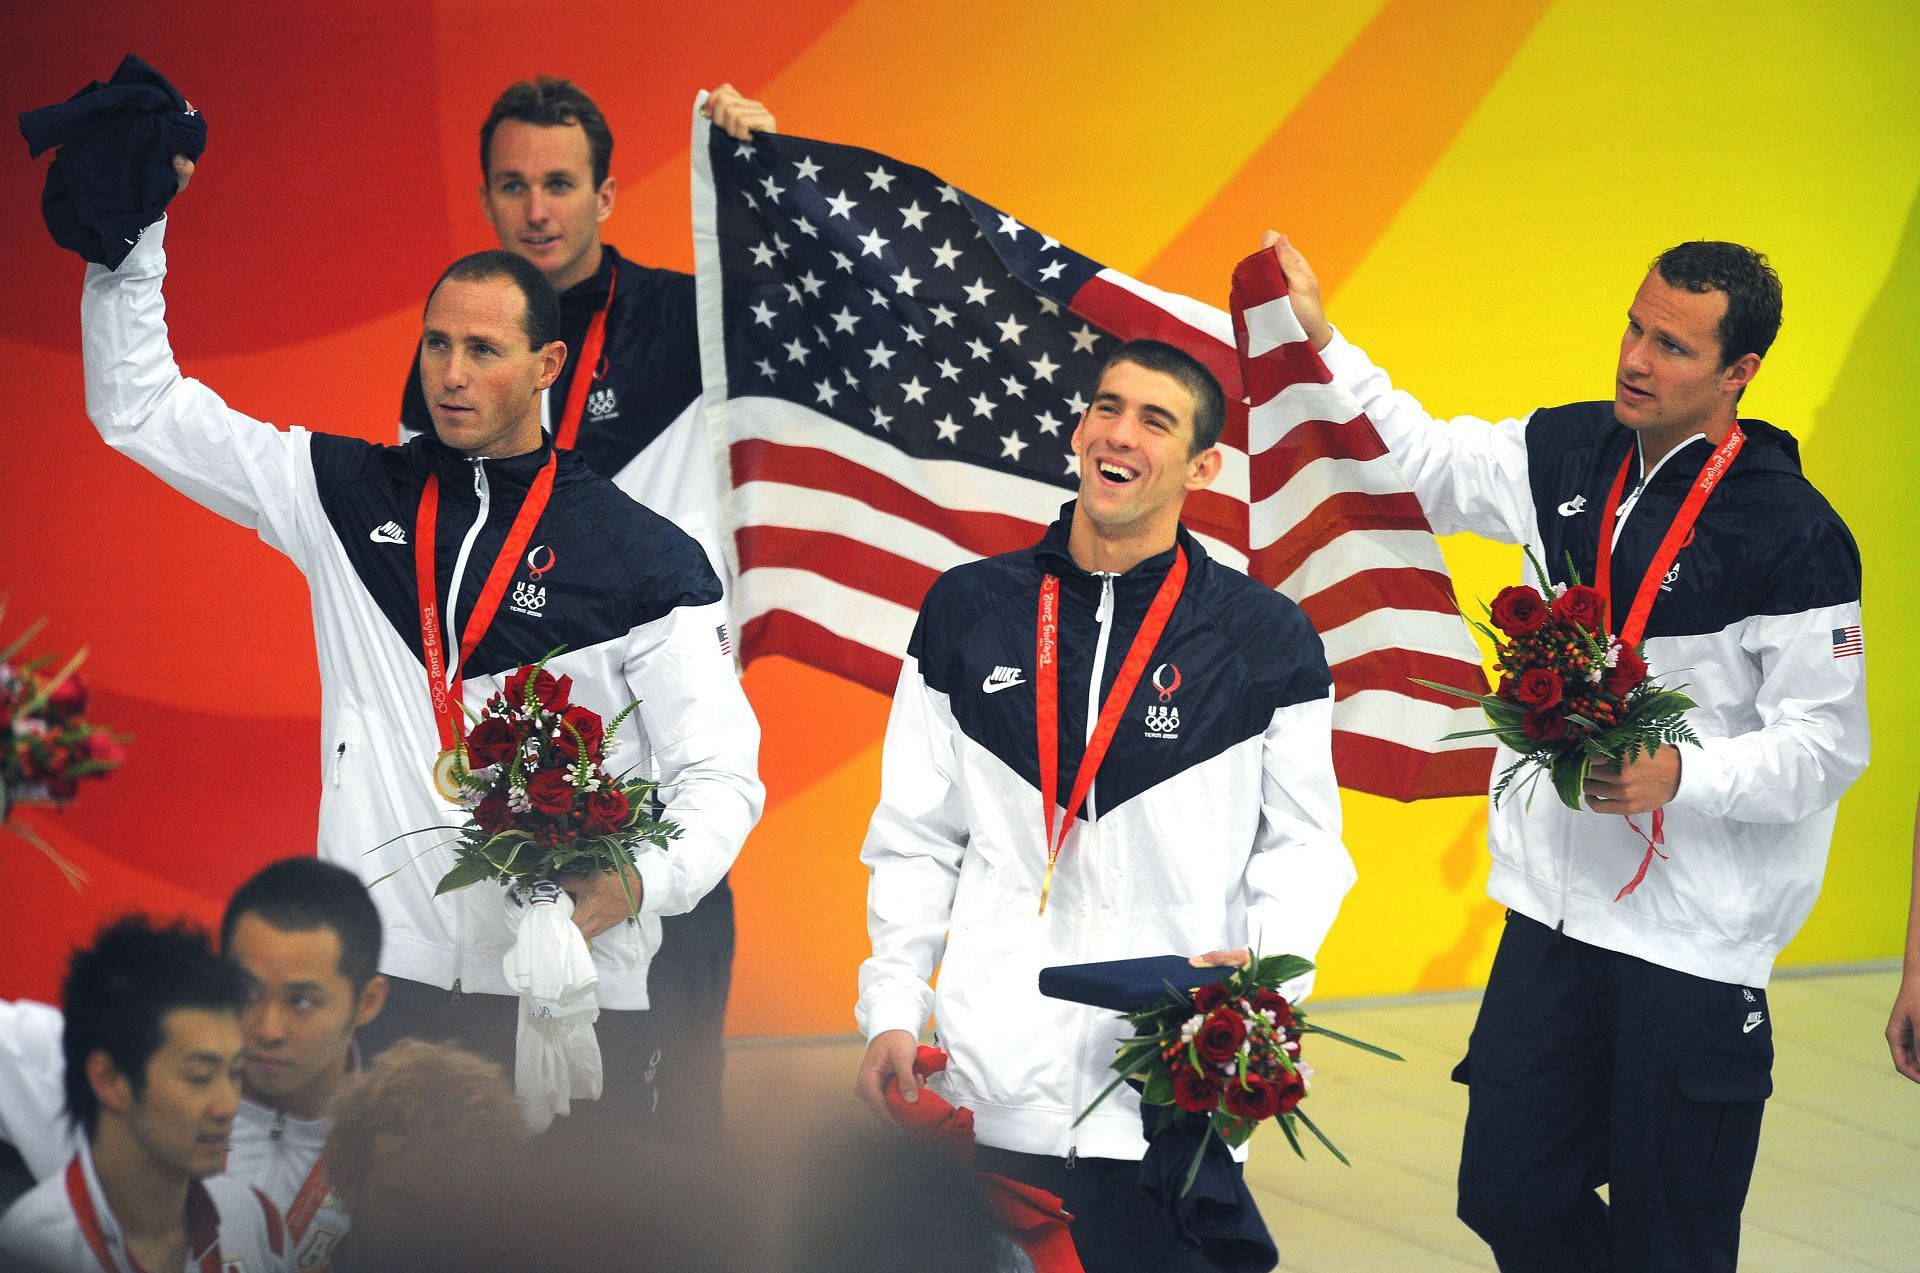 Phelps at the 2008 Beijing Olympics: Swimming (Image via Getty)